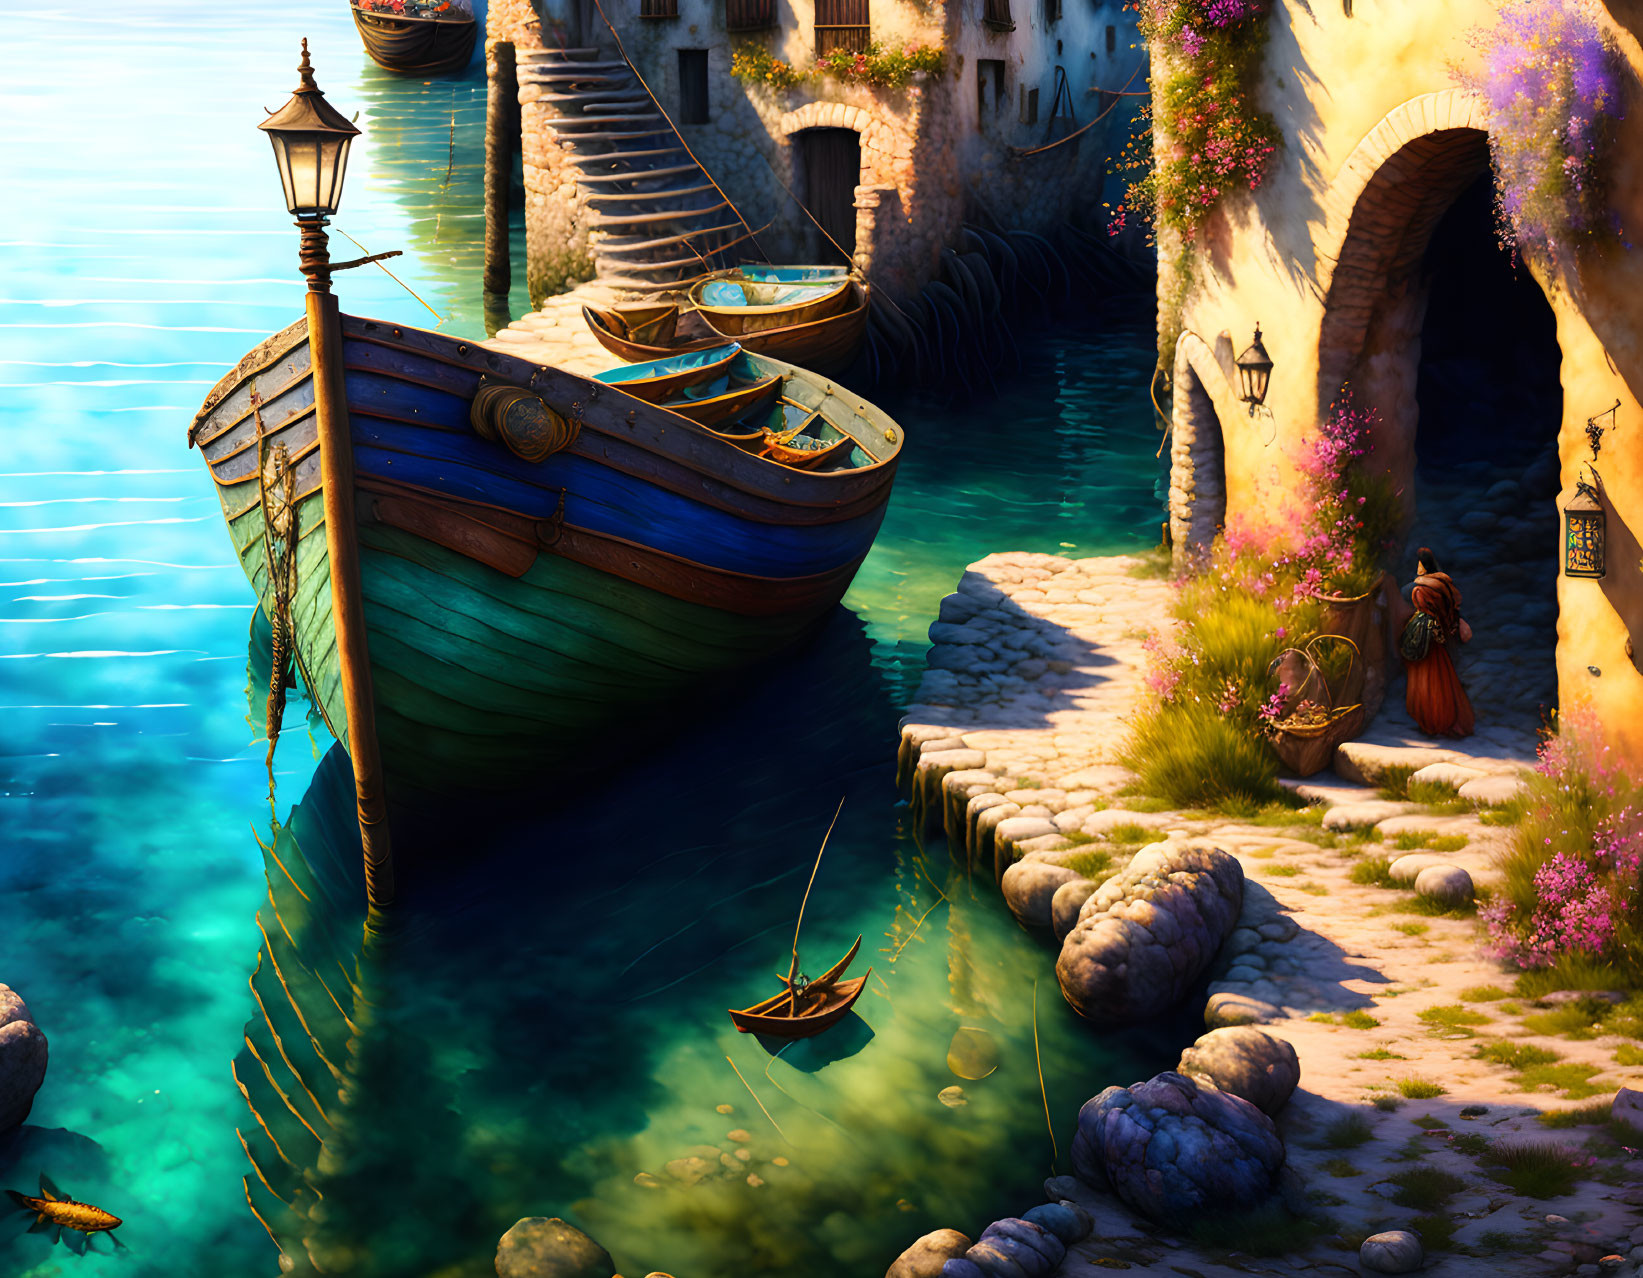 Tranquil harbor scene with wooden boat, stone piers, Mediterranean buildings, and lush flora